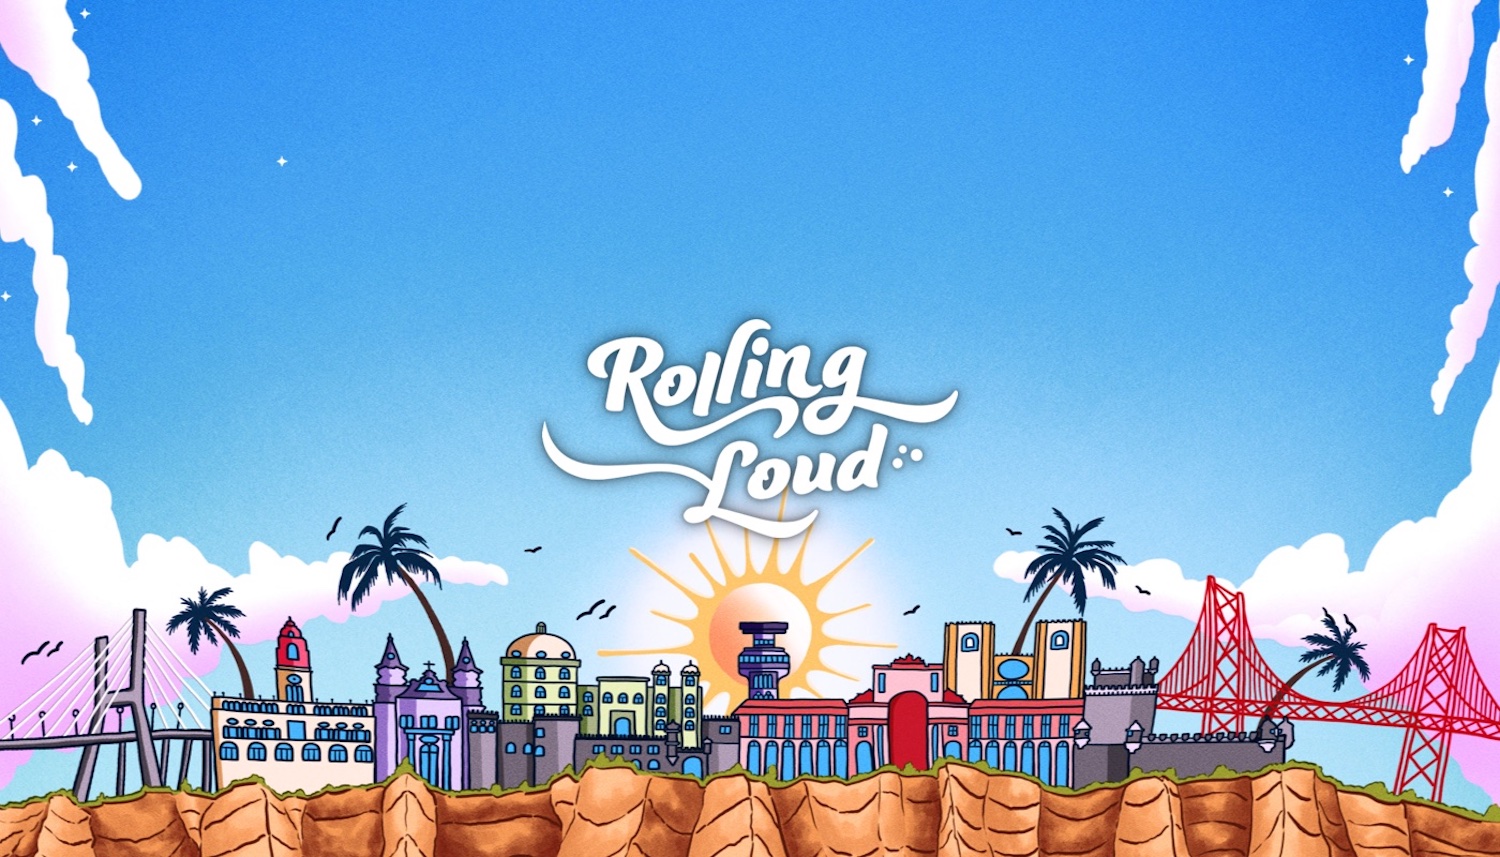 Here’s The Official Line-Up For Rolling Loud 2021